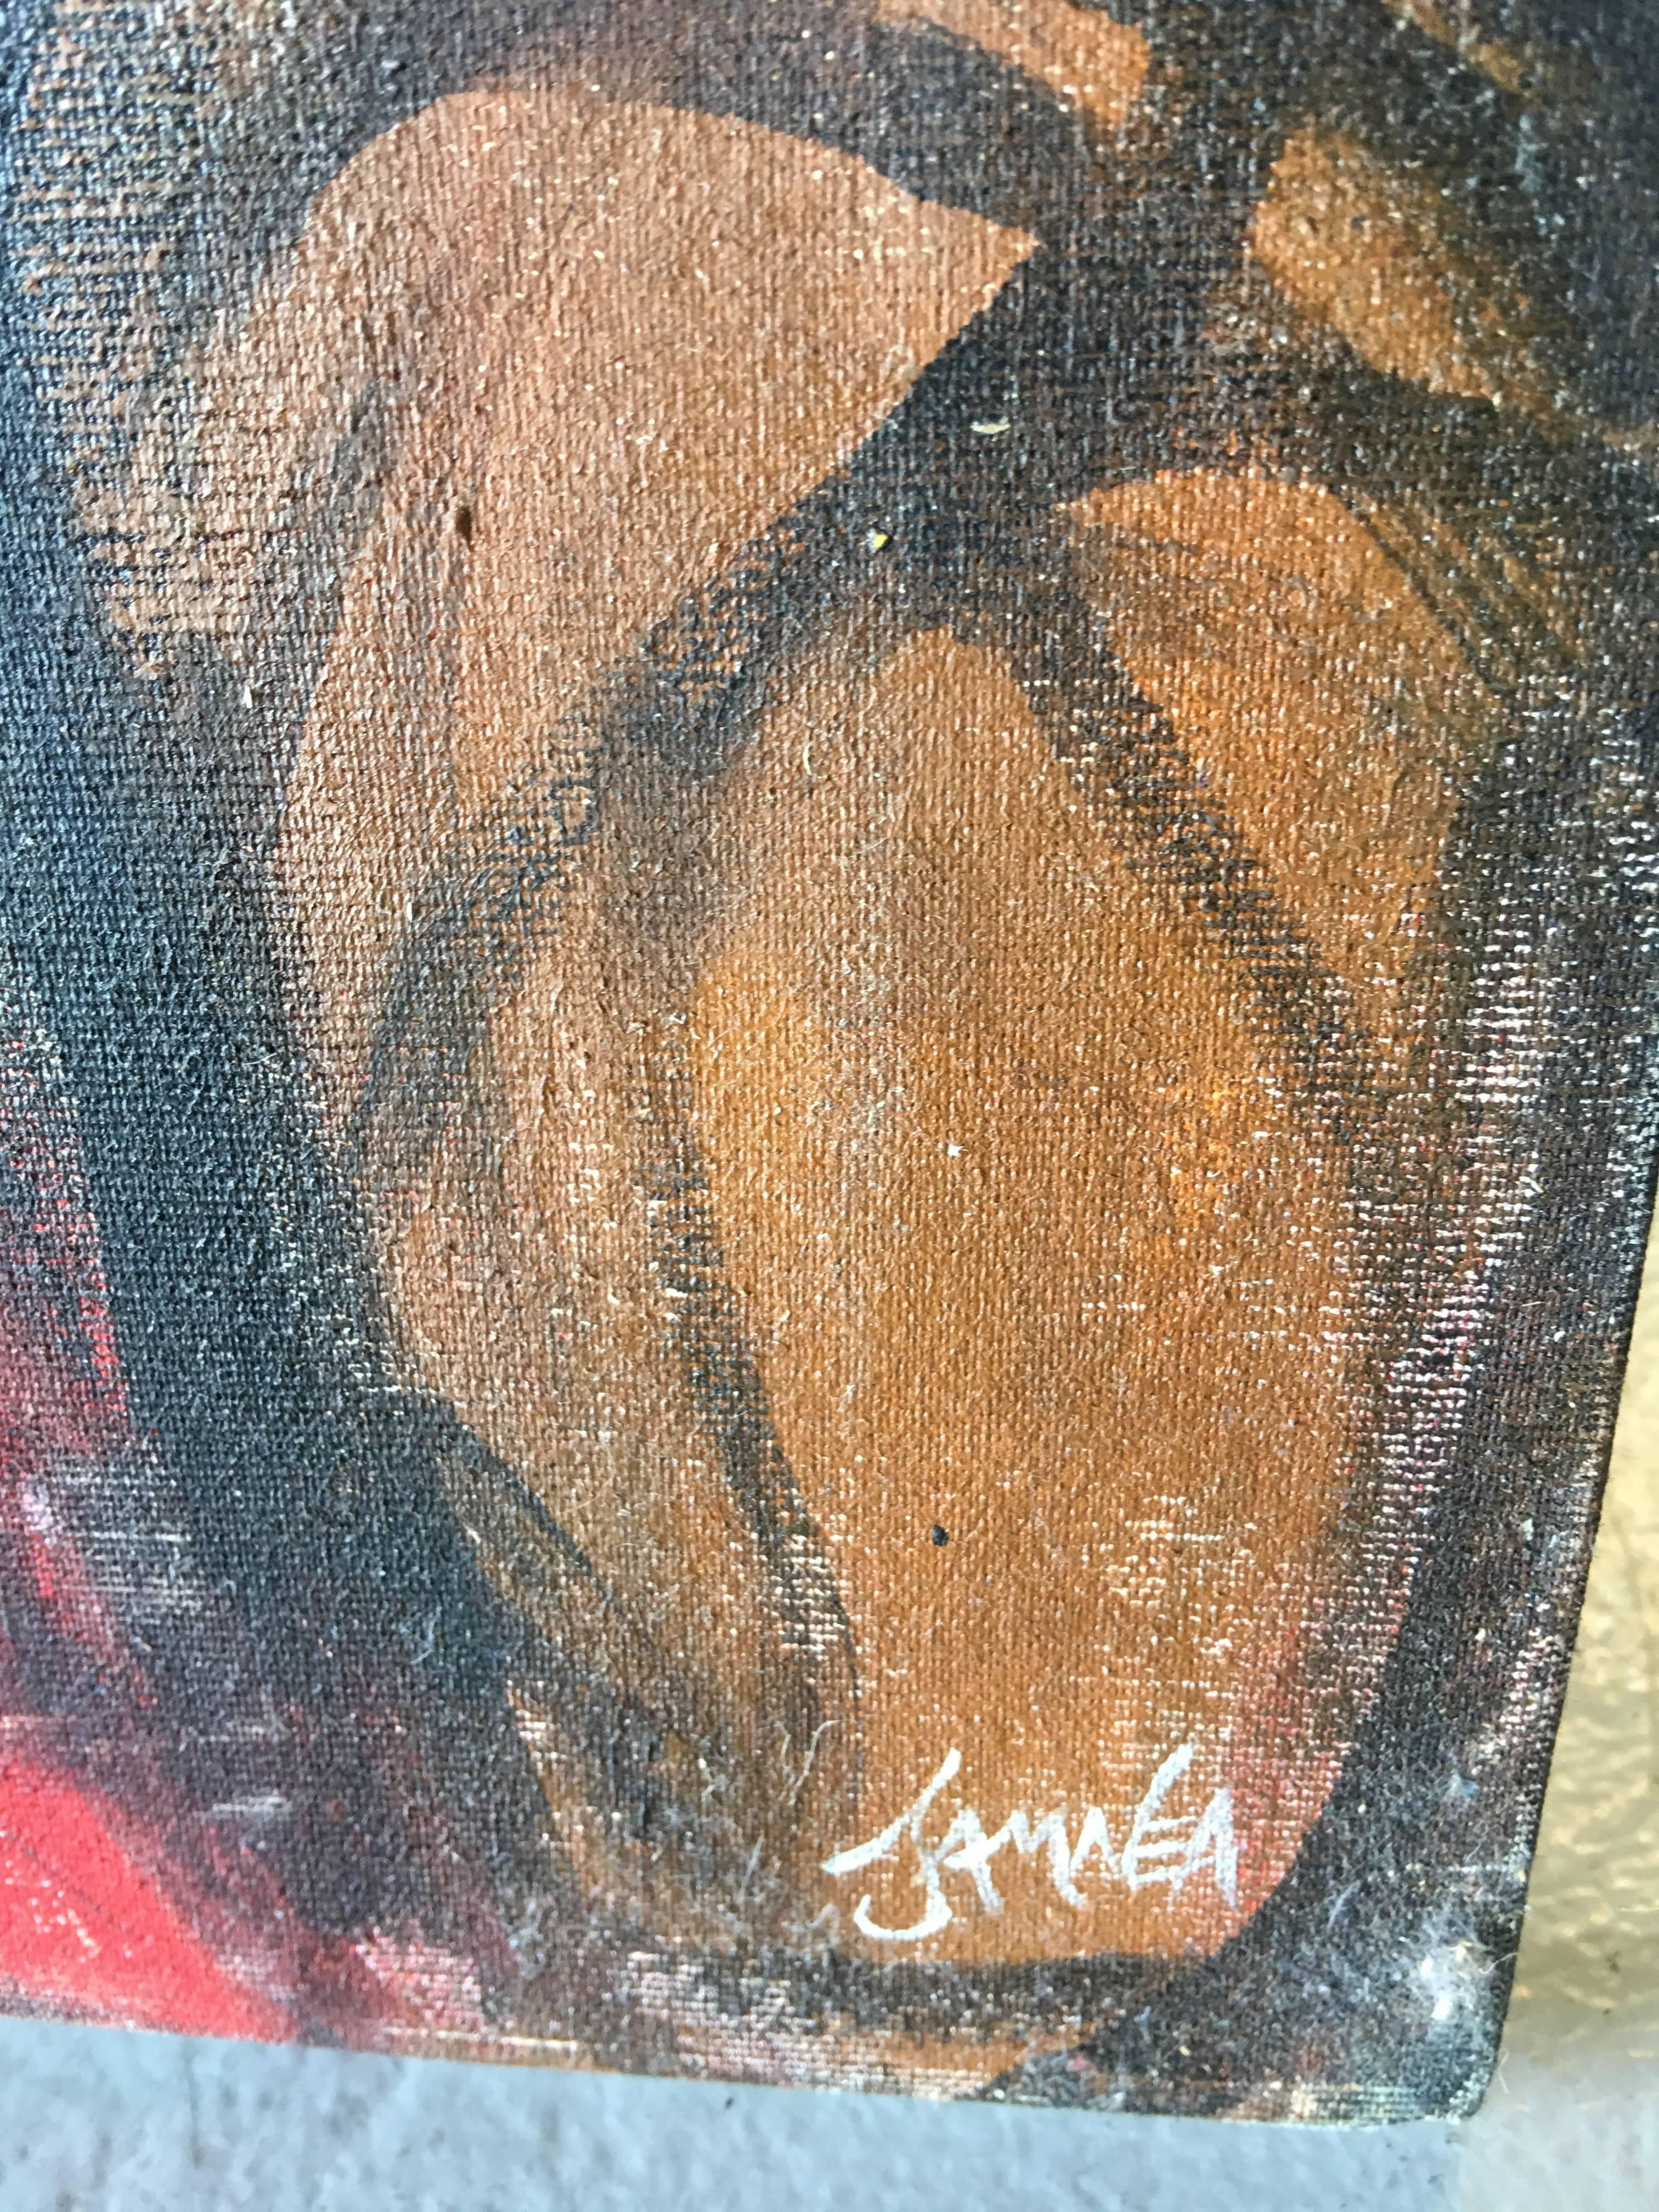 oil on canvas by abstract expressionist painter Jamnea Jacas